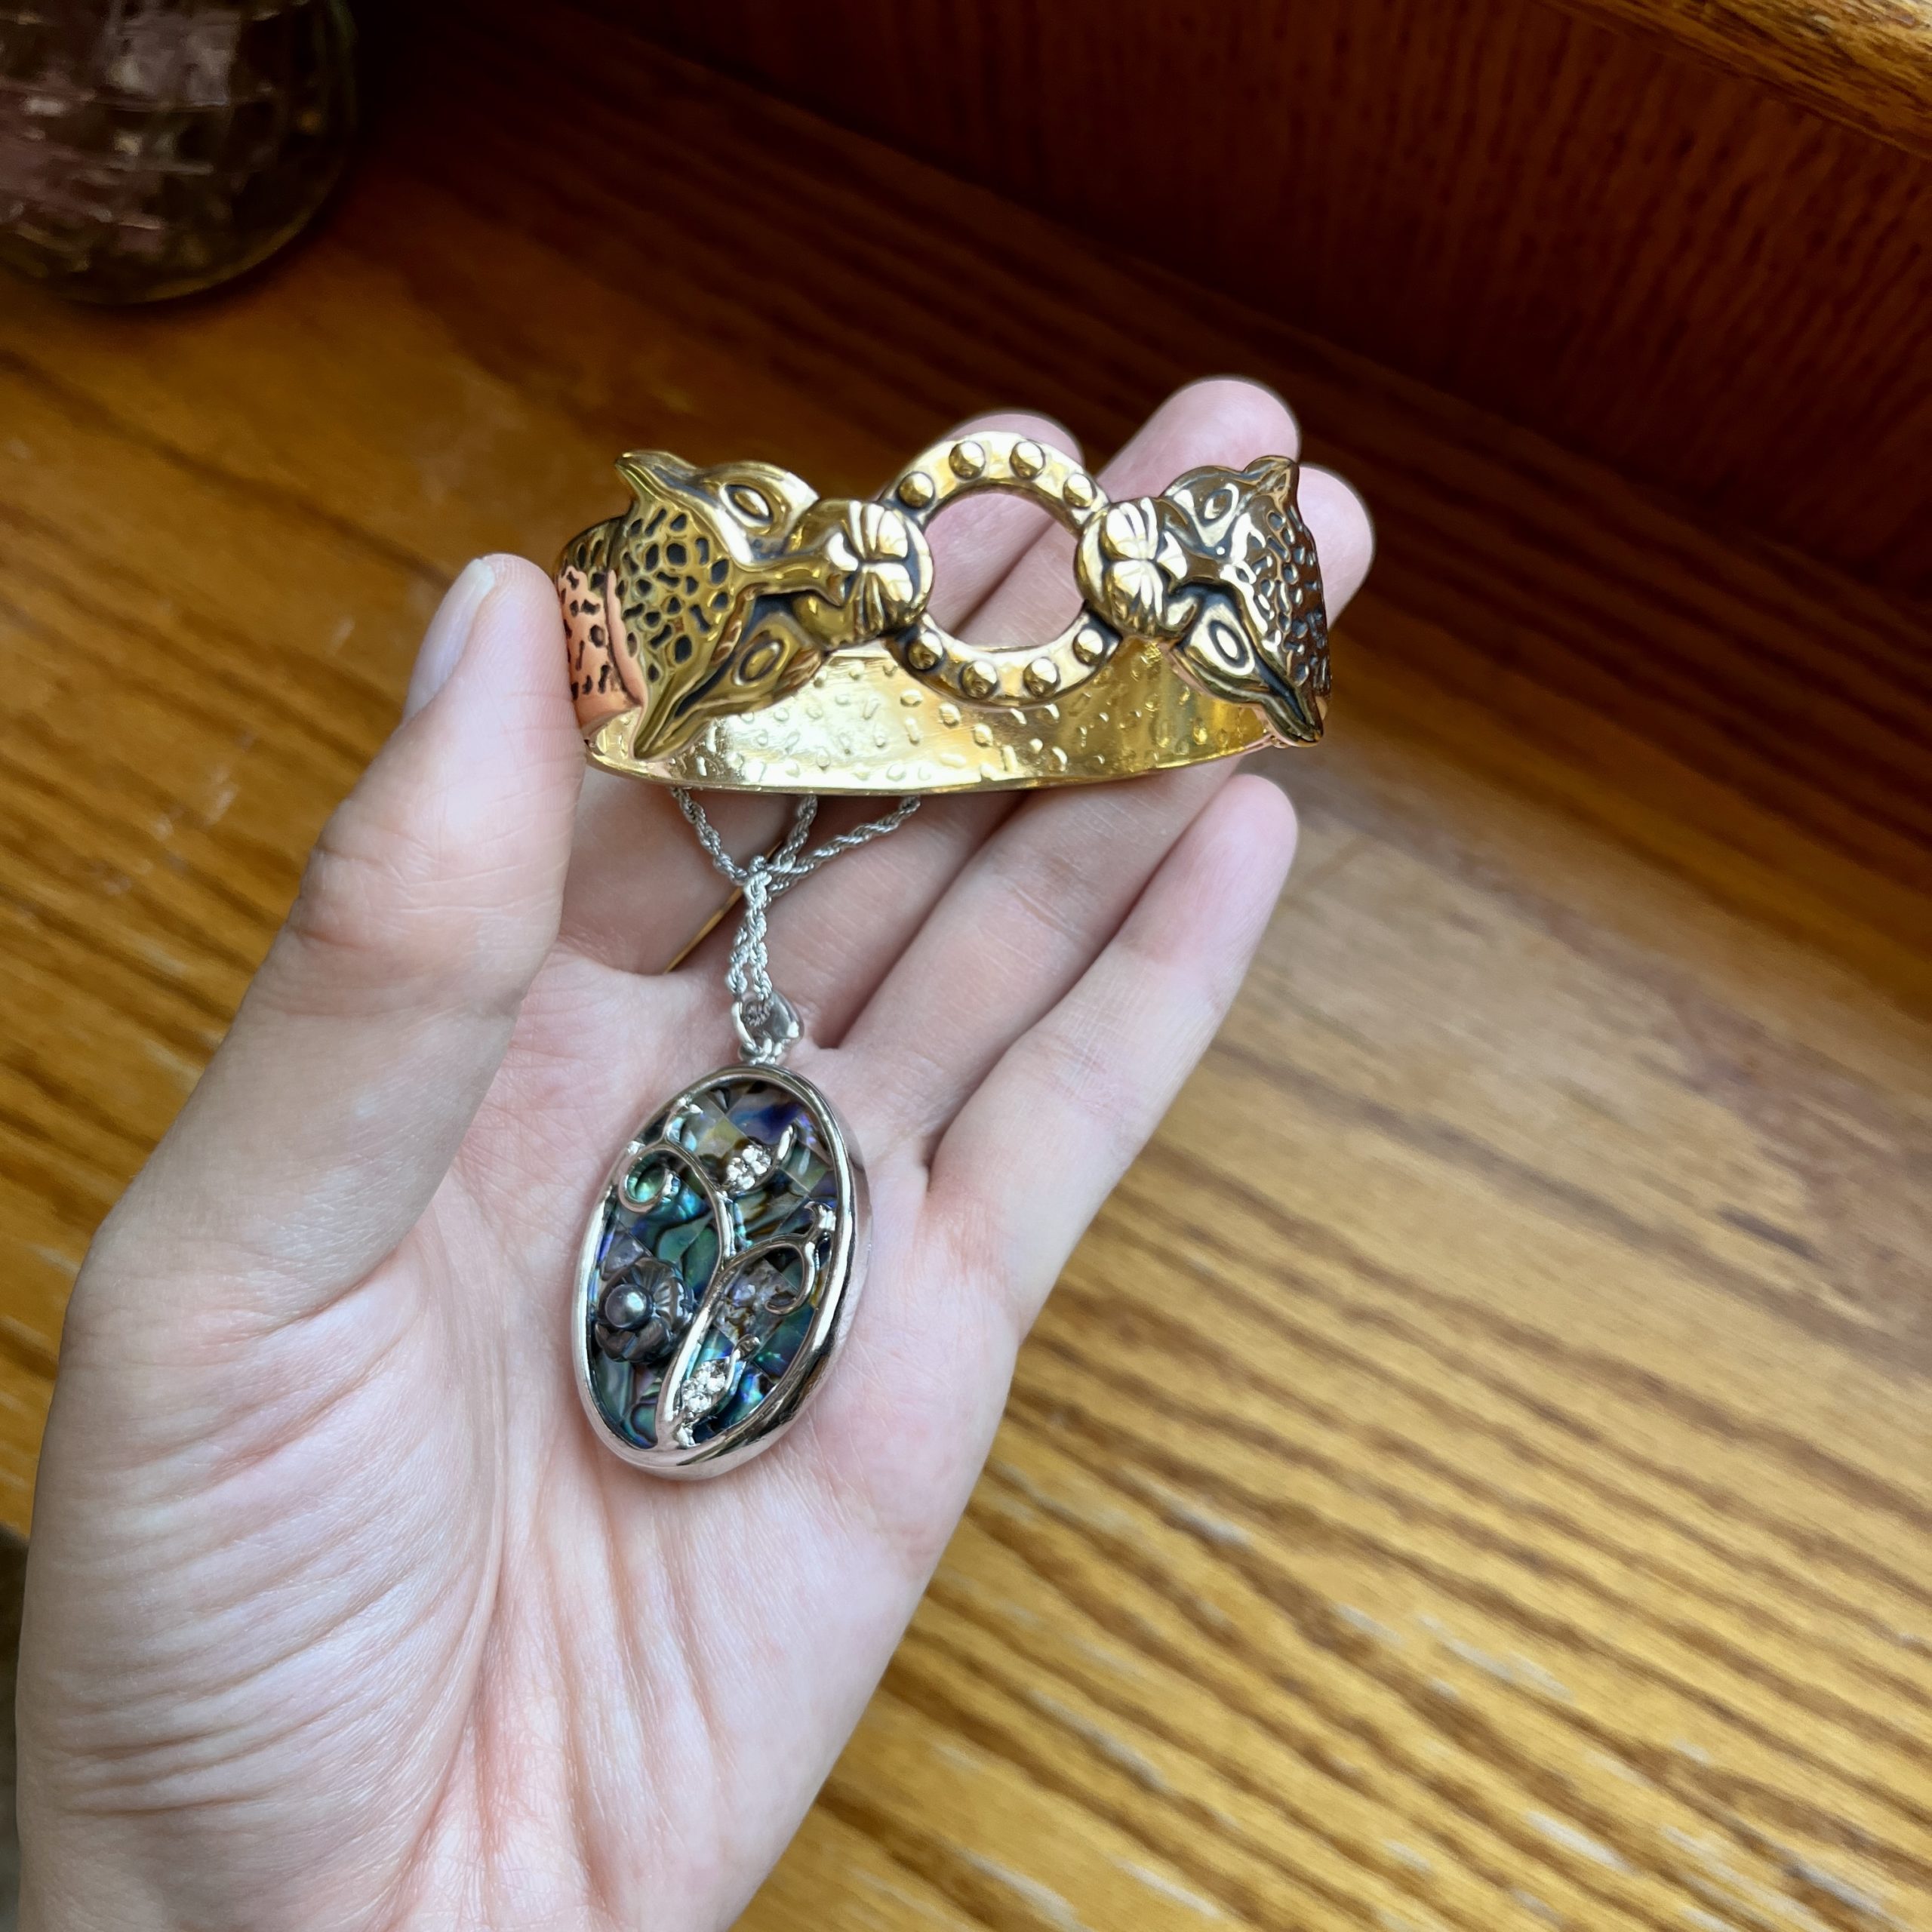 Leopard gold bangle and floral shell pendant